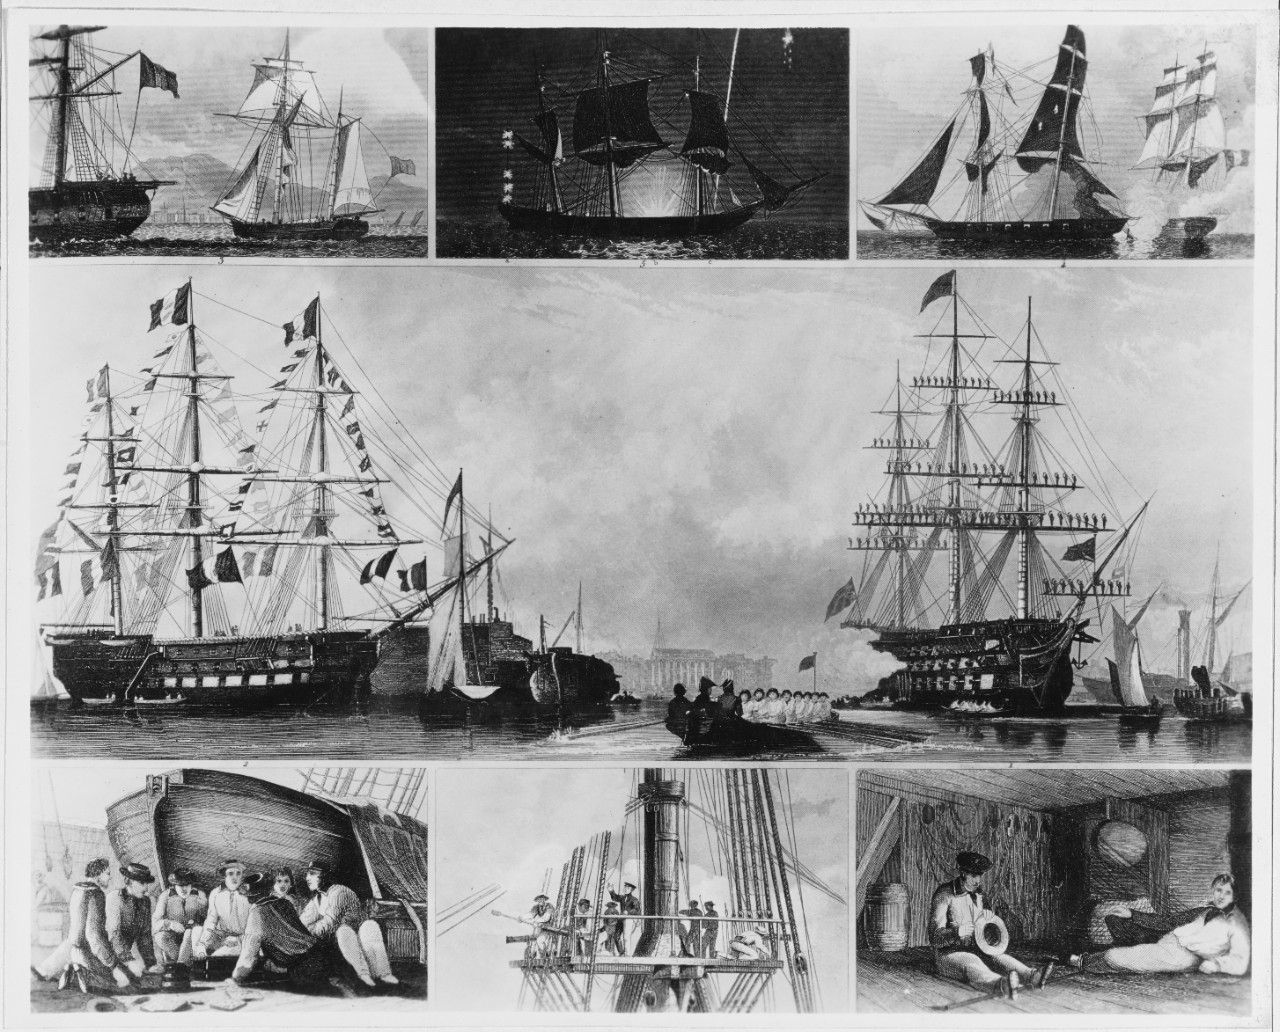 Interior Views of ships, Drawings, appear to be 1700's